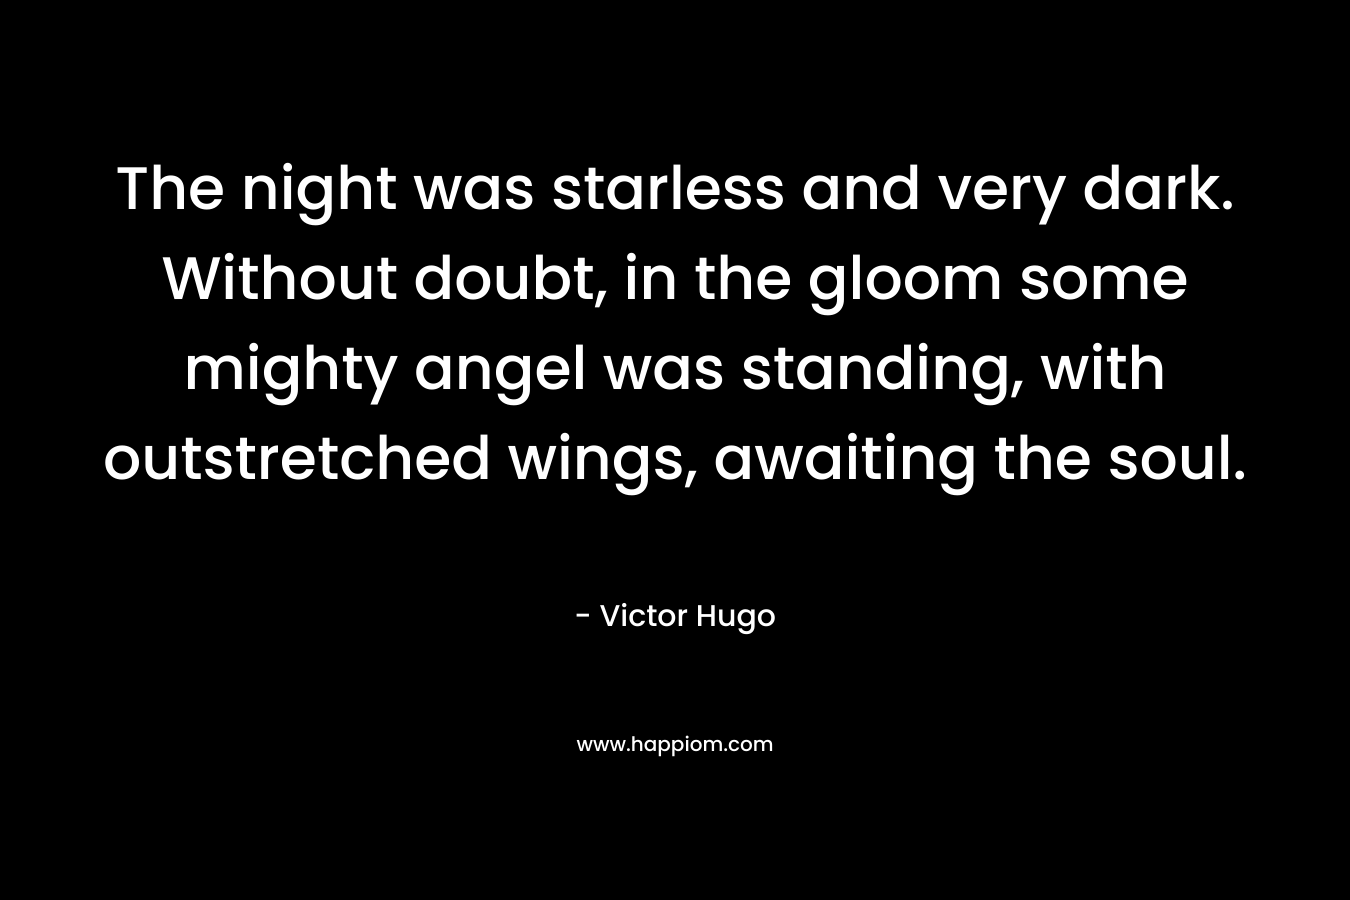 The night was starless and very dark. Without doubt, in the gloom some mighty angel was standing, with outstretched wings, awaiting the soul. – Victor Hugo